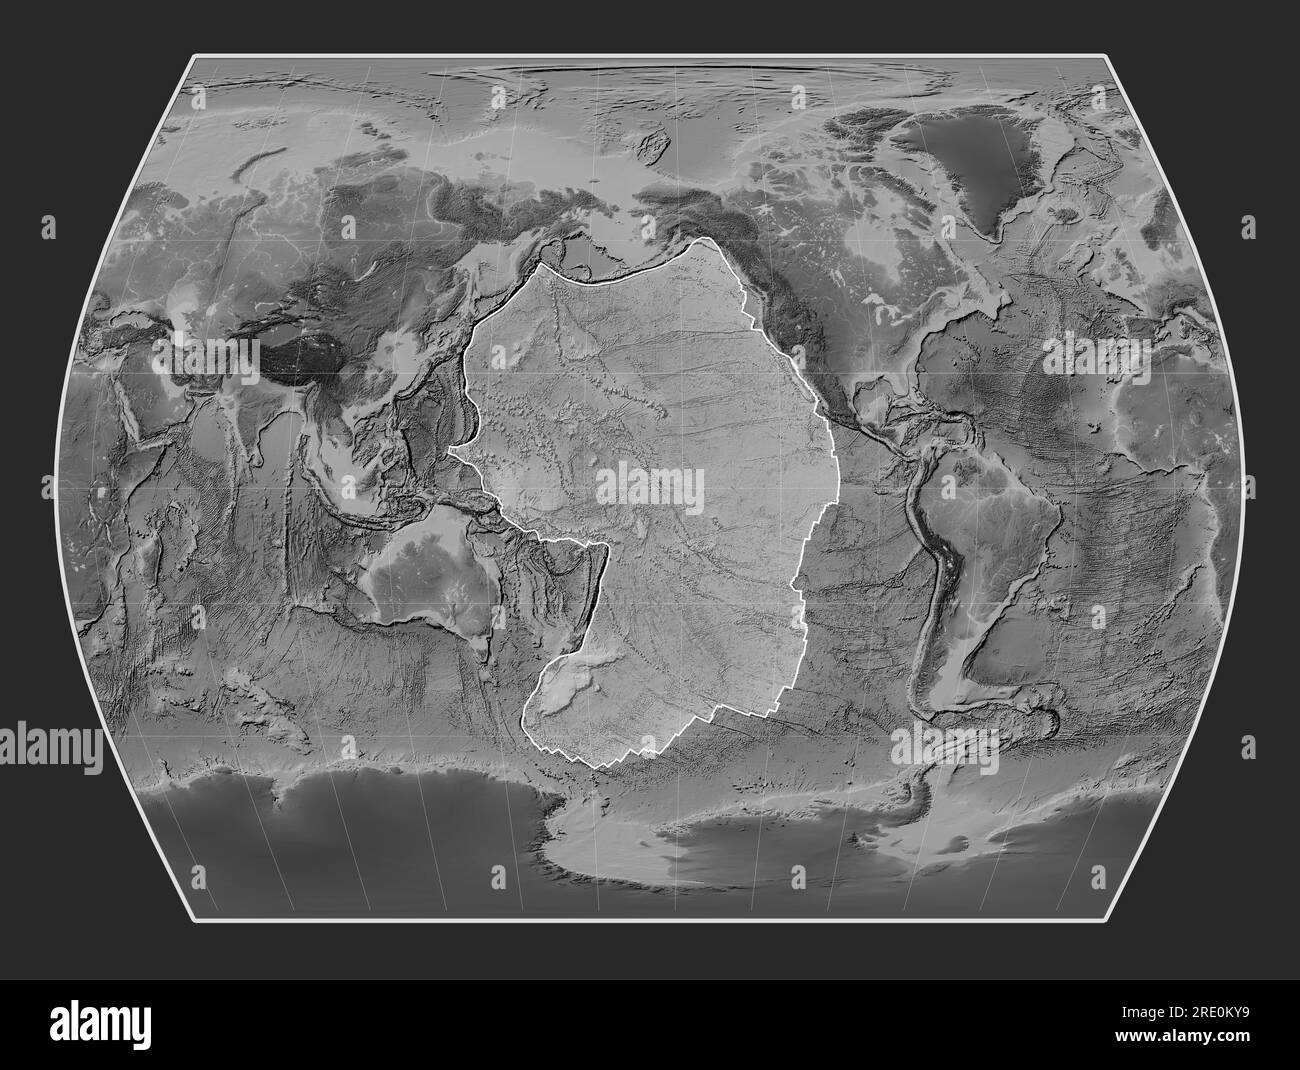 Pacific tectonic plate on the grayscale elevation map in the Times ...